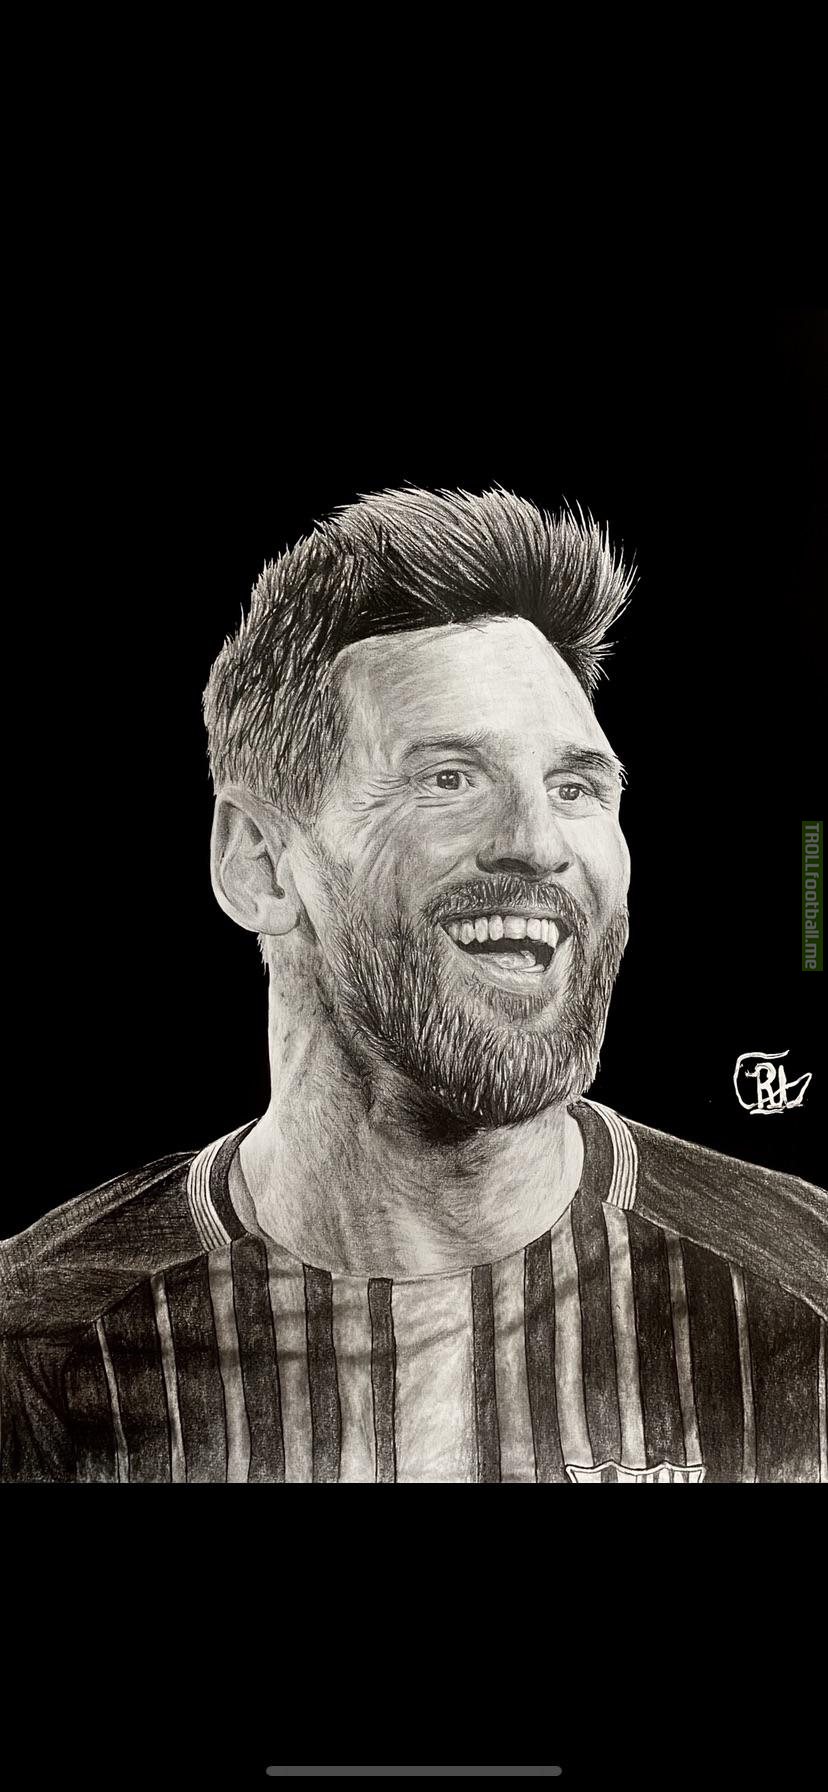 Pencil drawing of the greatest player of all time Lionel Messi done by me🔴🔵 Hope you guys like it❤️ (rickytoker_art on Instagram)